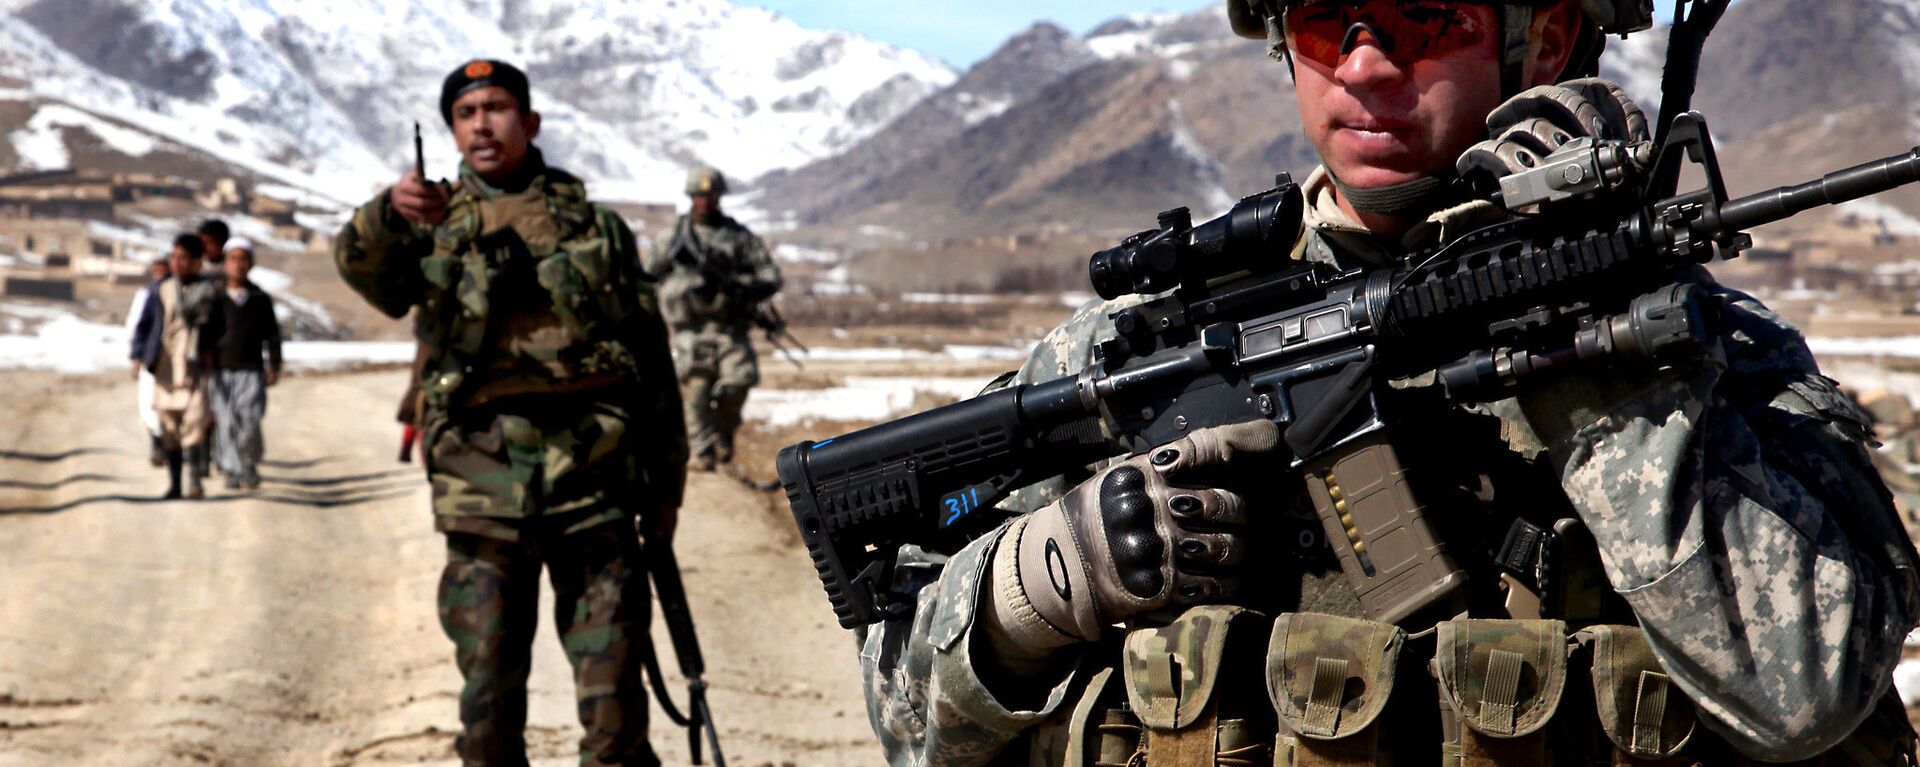 A U.S. Army Soldier patrols with Afghan soldiers to check on conditions in the village of Yawez in Wardak province, Afghanistan, Feb. 17, 2010 - Sputnik International, 1920, 17.03.2021